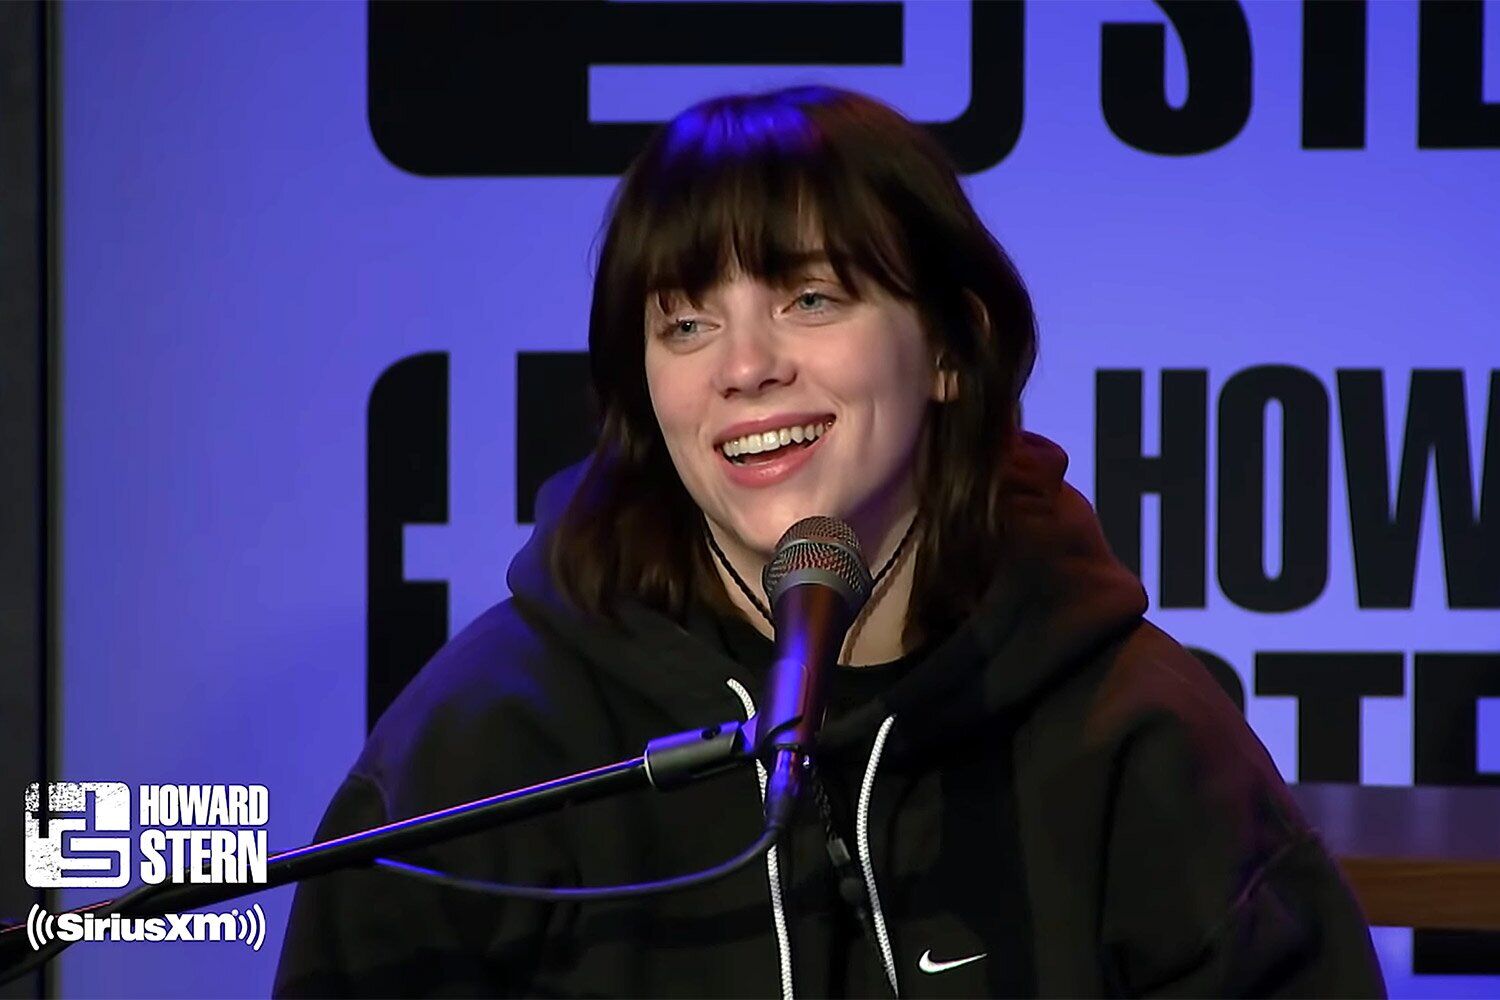 Billie Eilish on Howard Stern show on December 12, 2021. She said that porn is a disgrace, that is destroyed her brain, and that she feels devastated